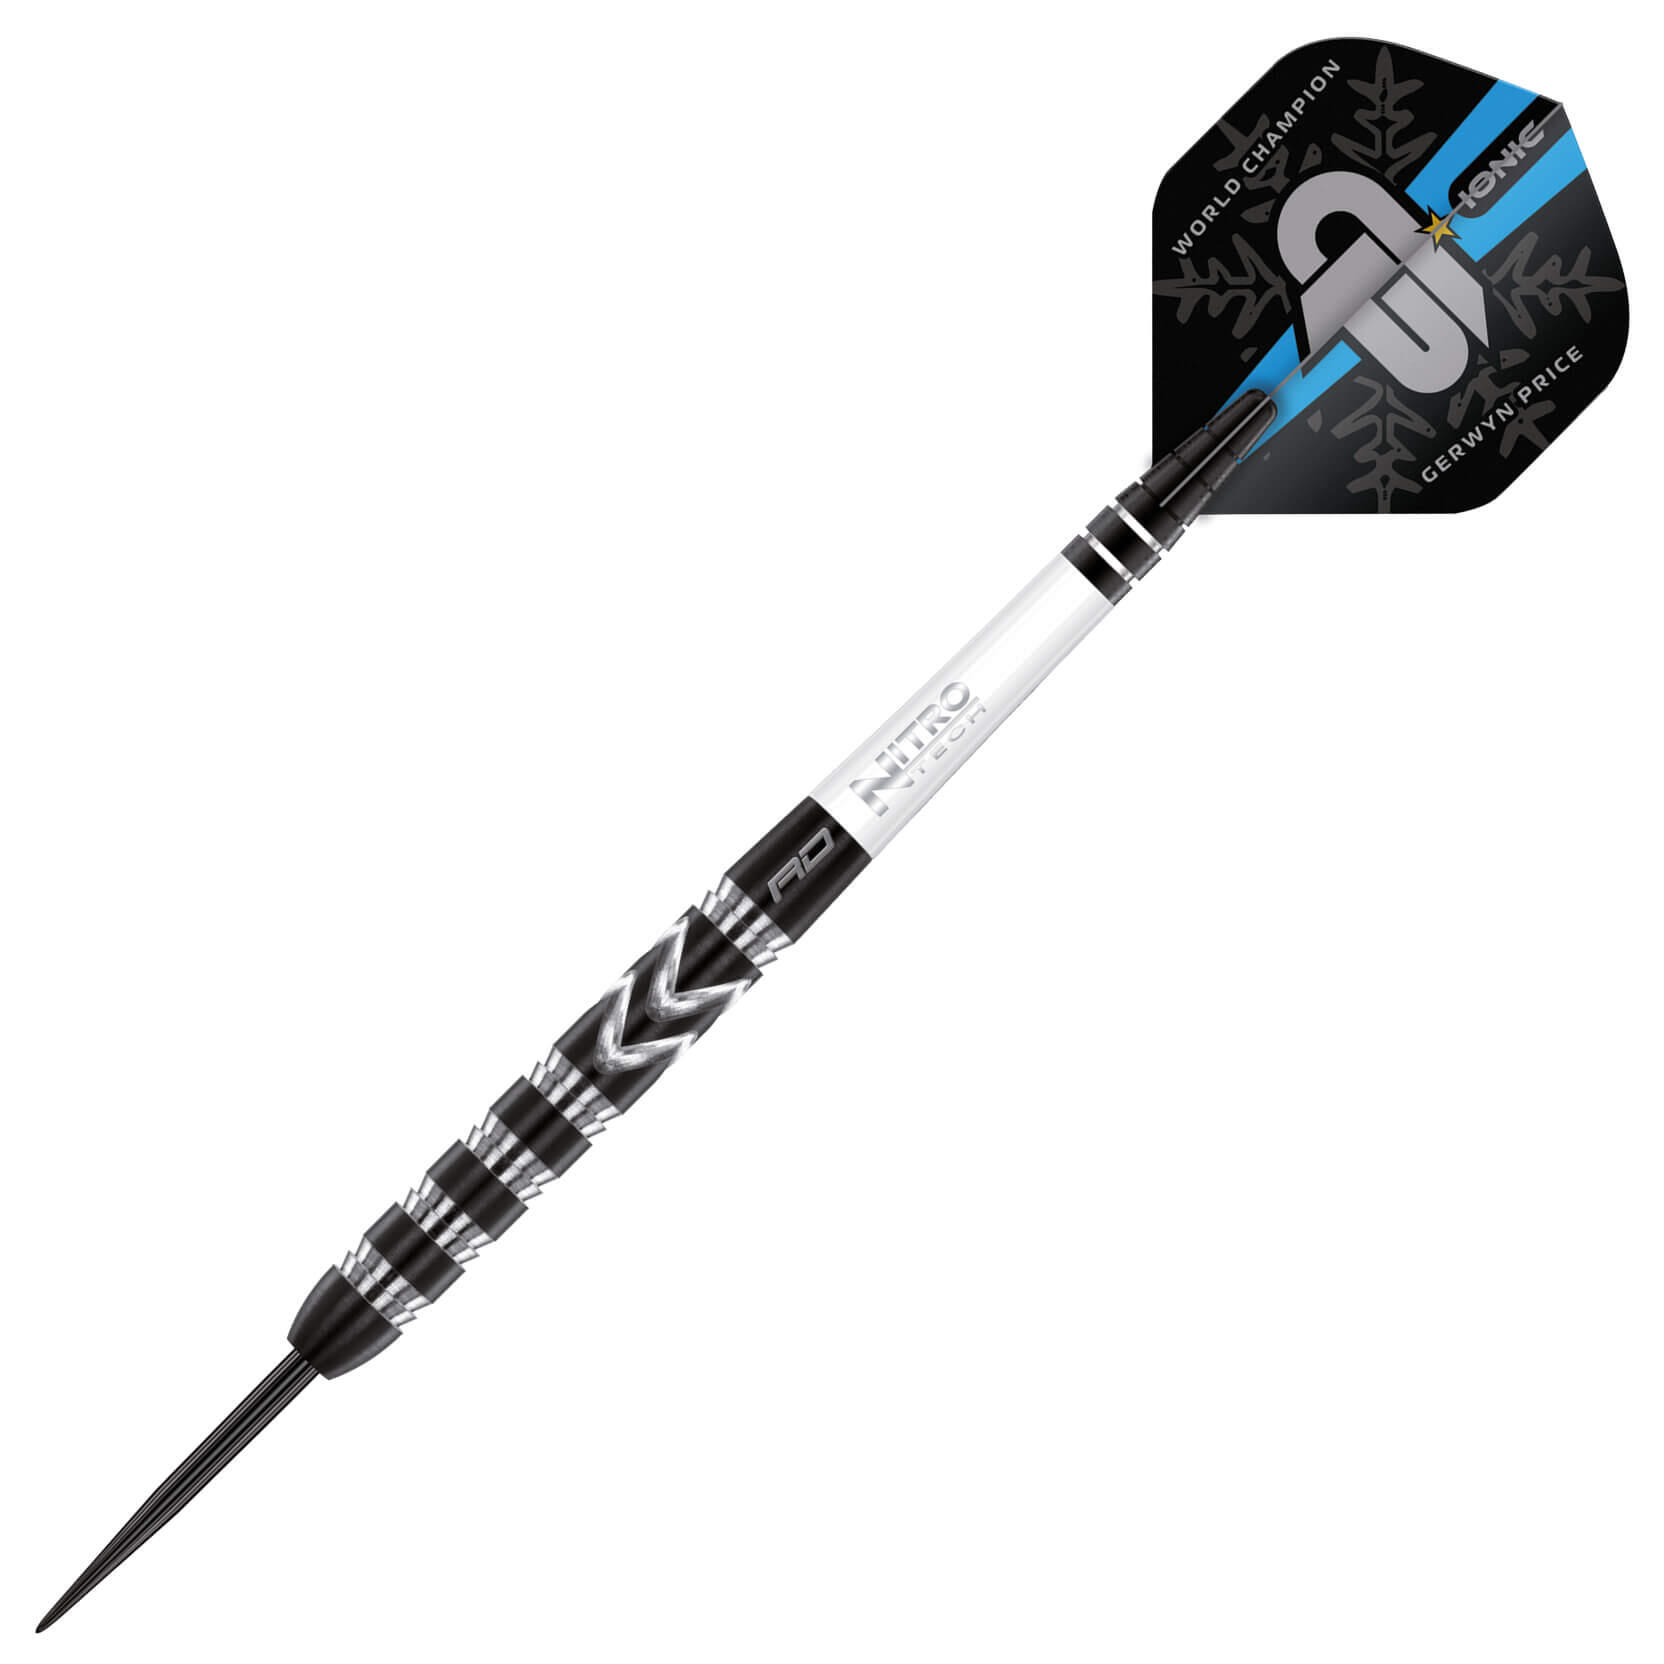 Red Dragon Gerwyn Price Iceman WC 24g Tungsten Darts Set with Flights and Stems 2/5